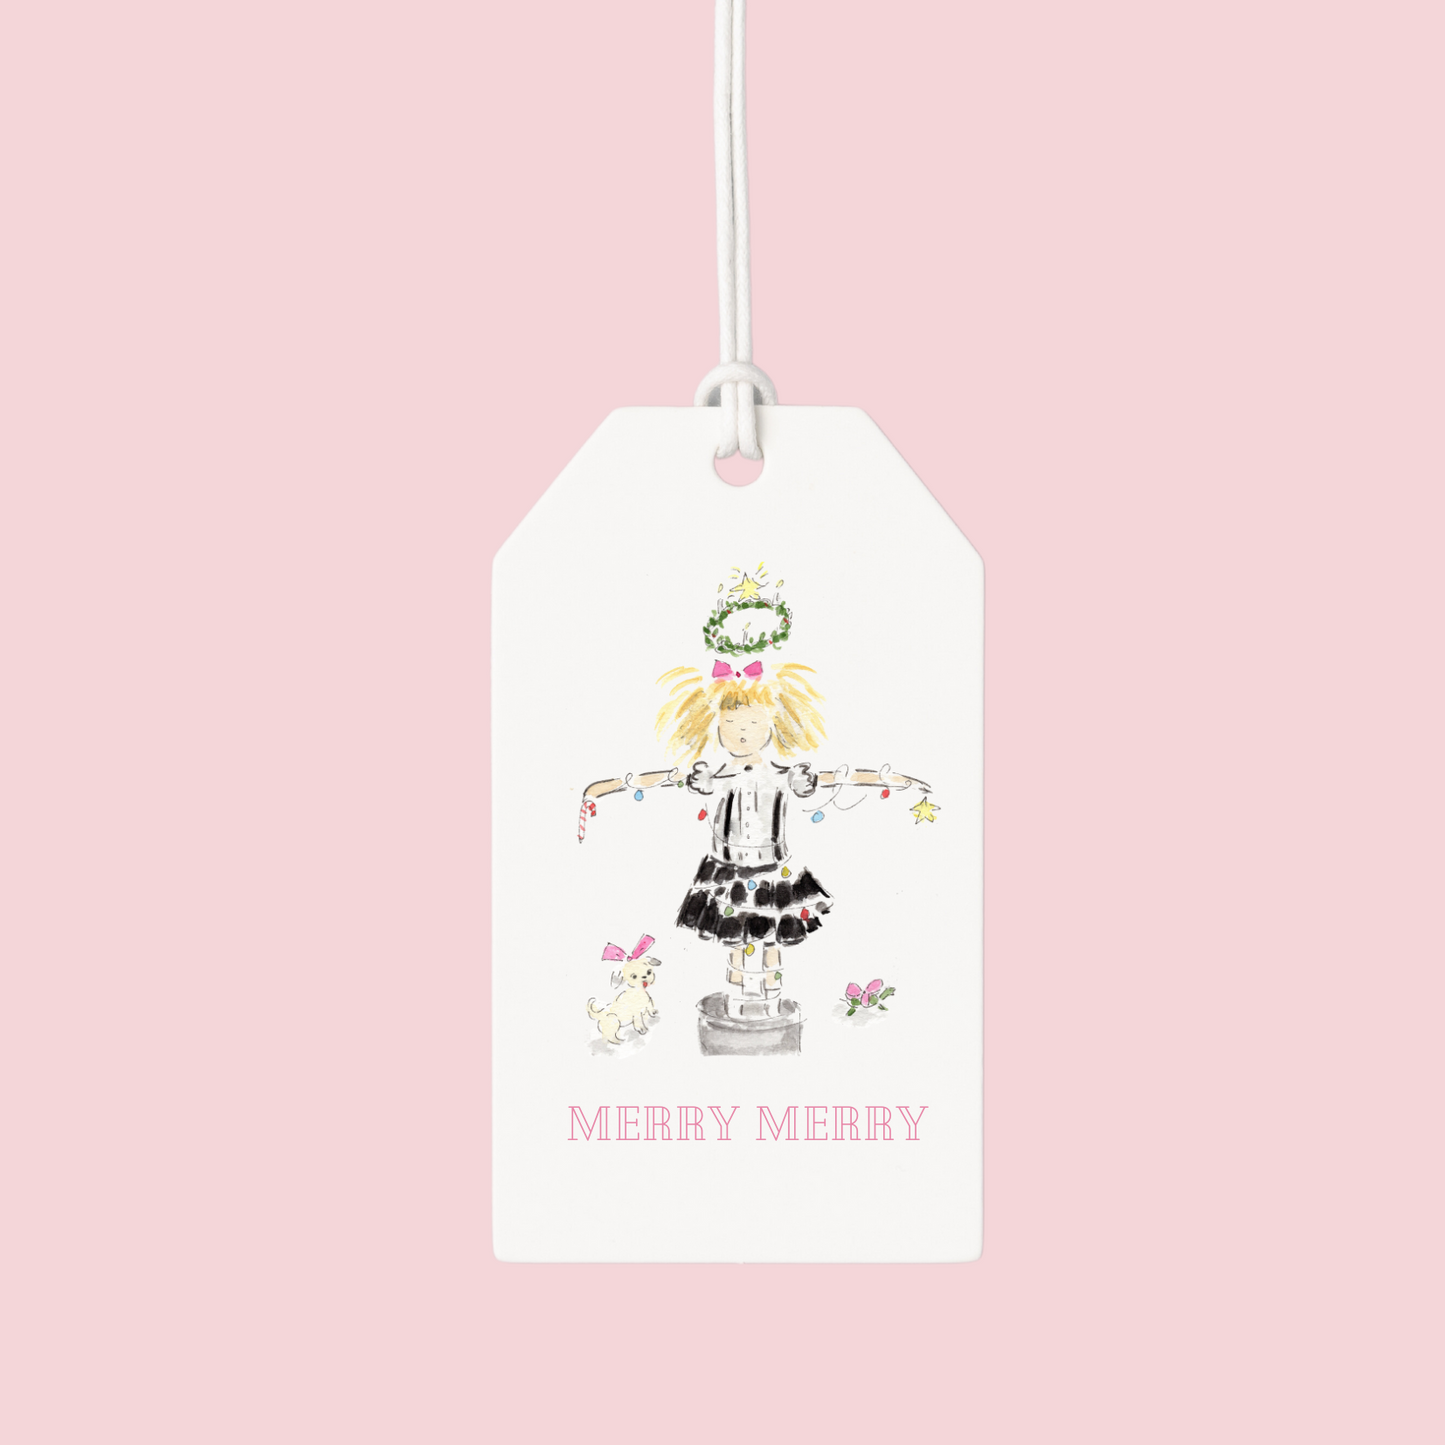 Gift Tags: Merry Merry